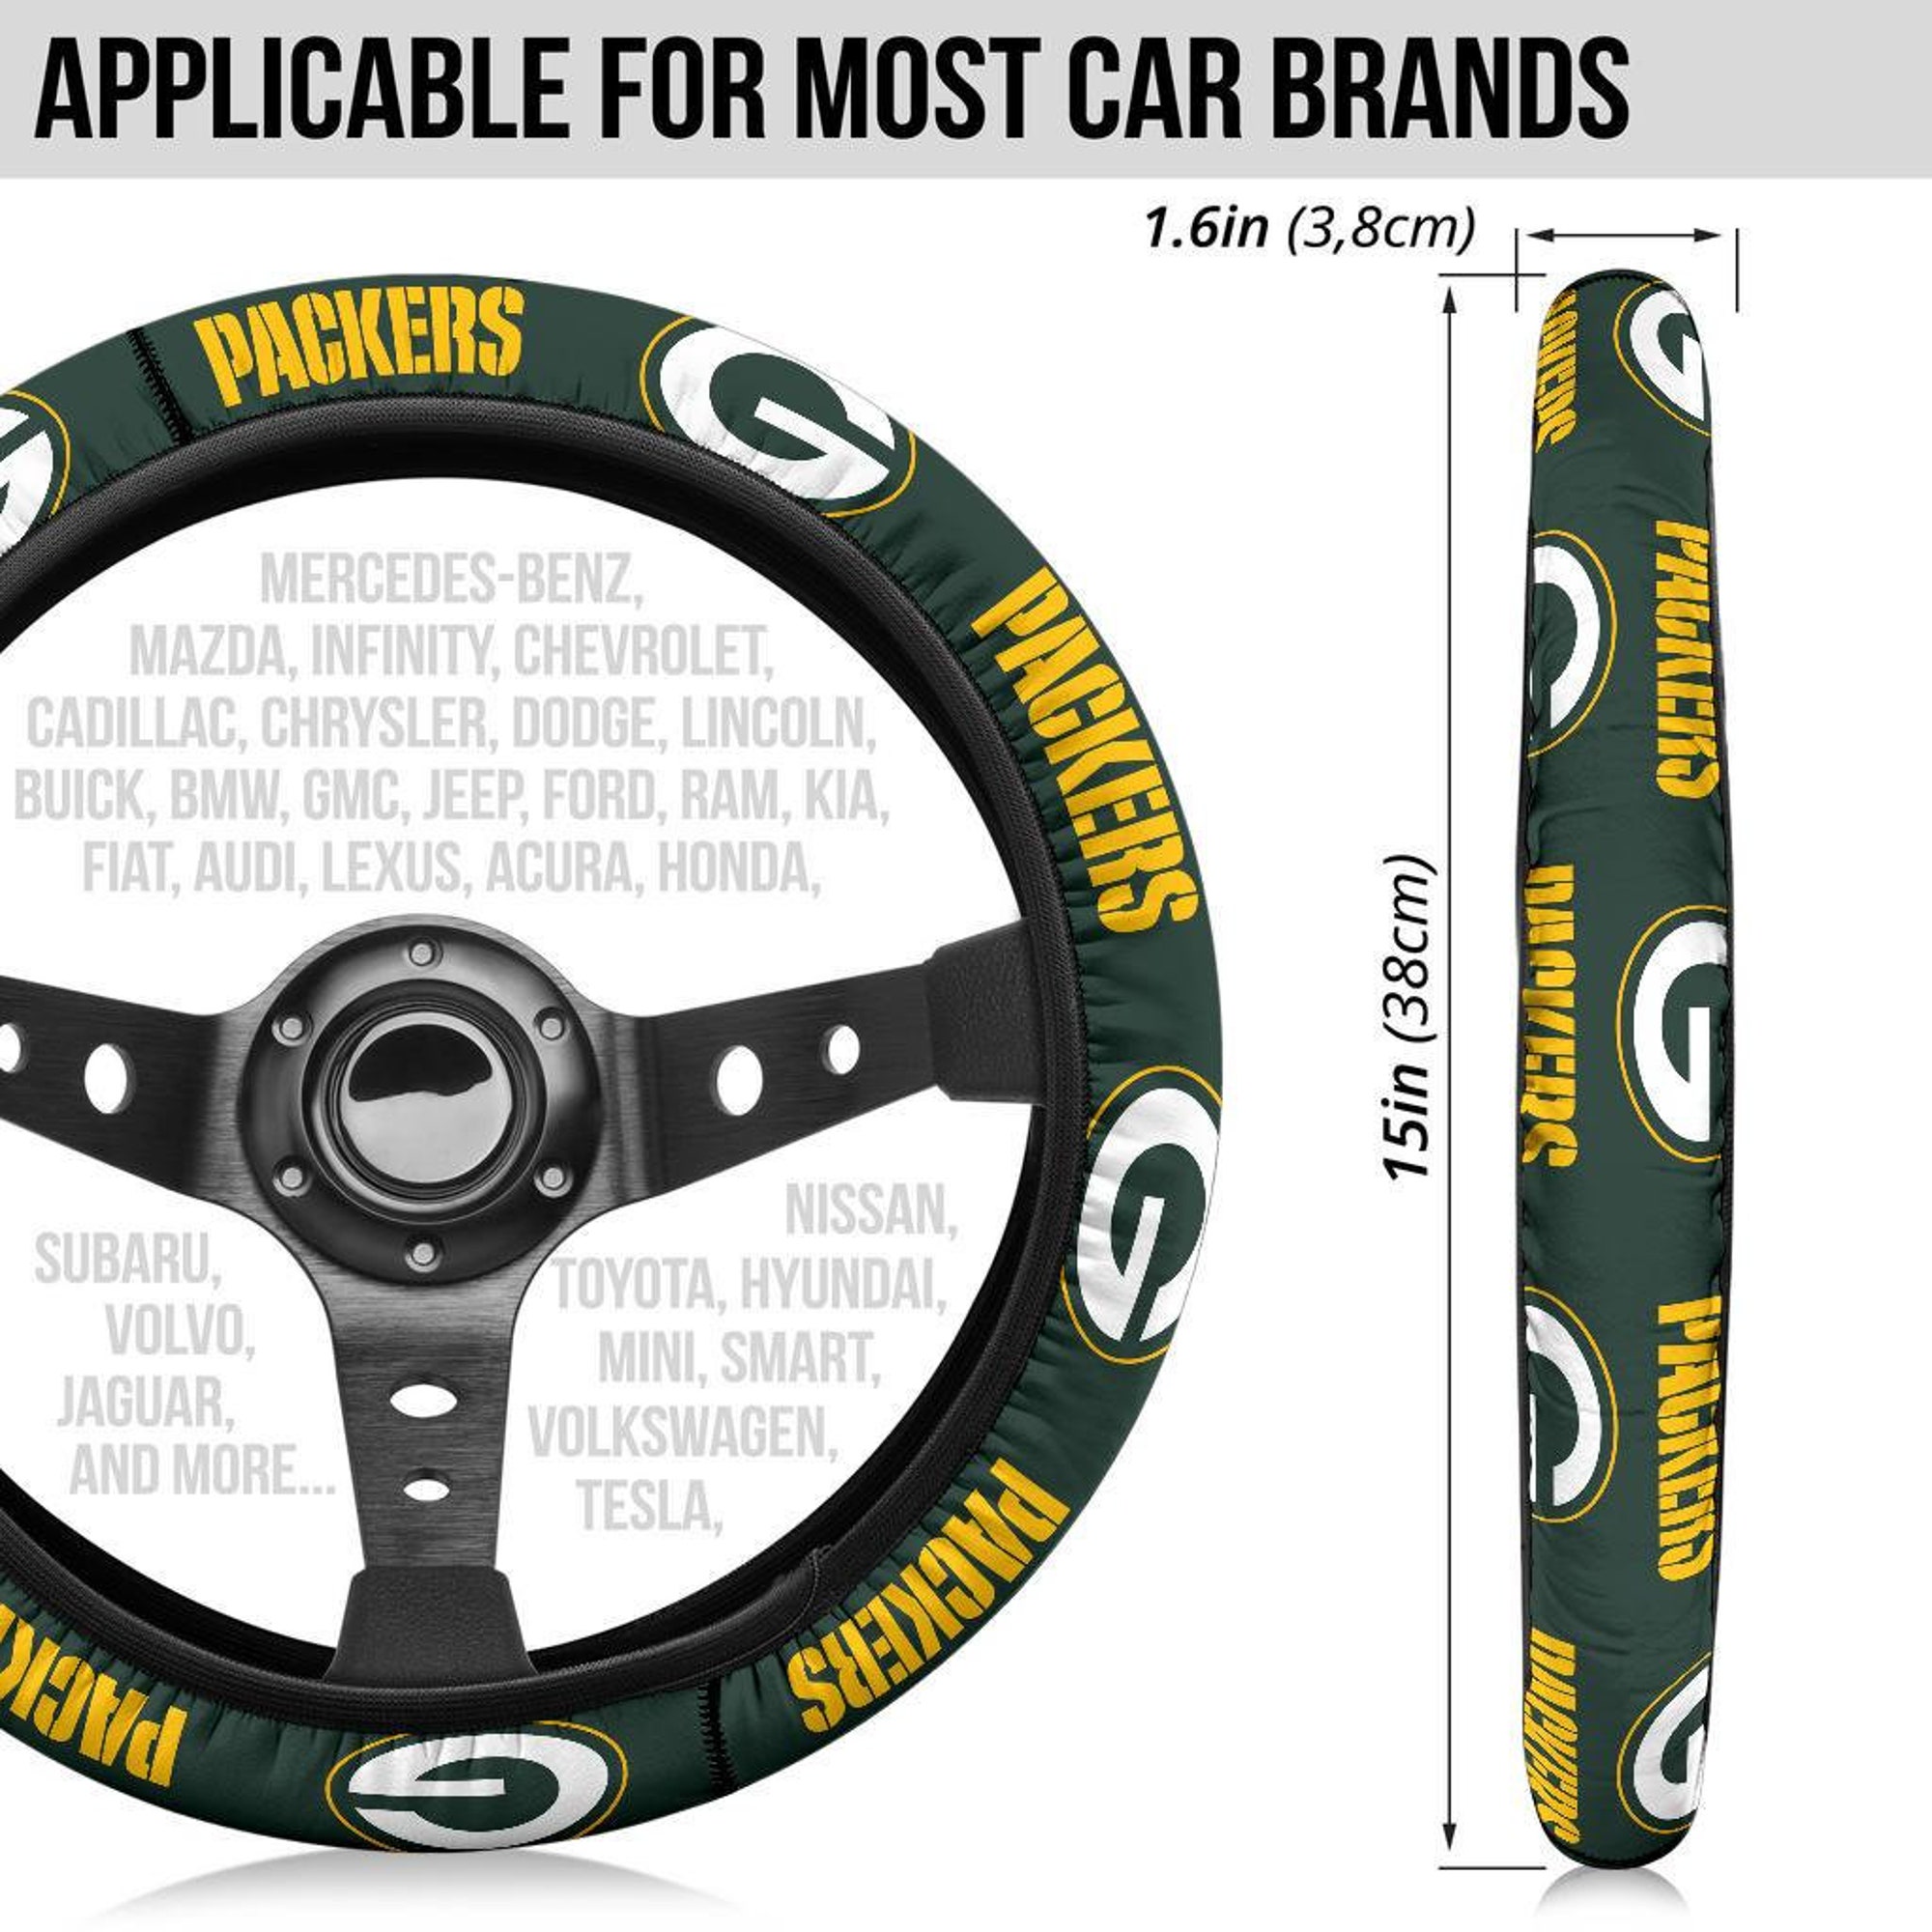 Green Bay Packers themed custom steering wheel cover for a fan